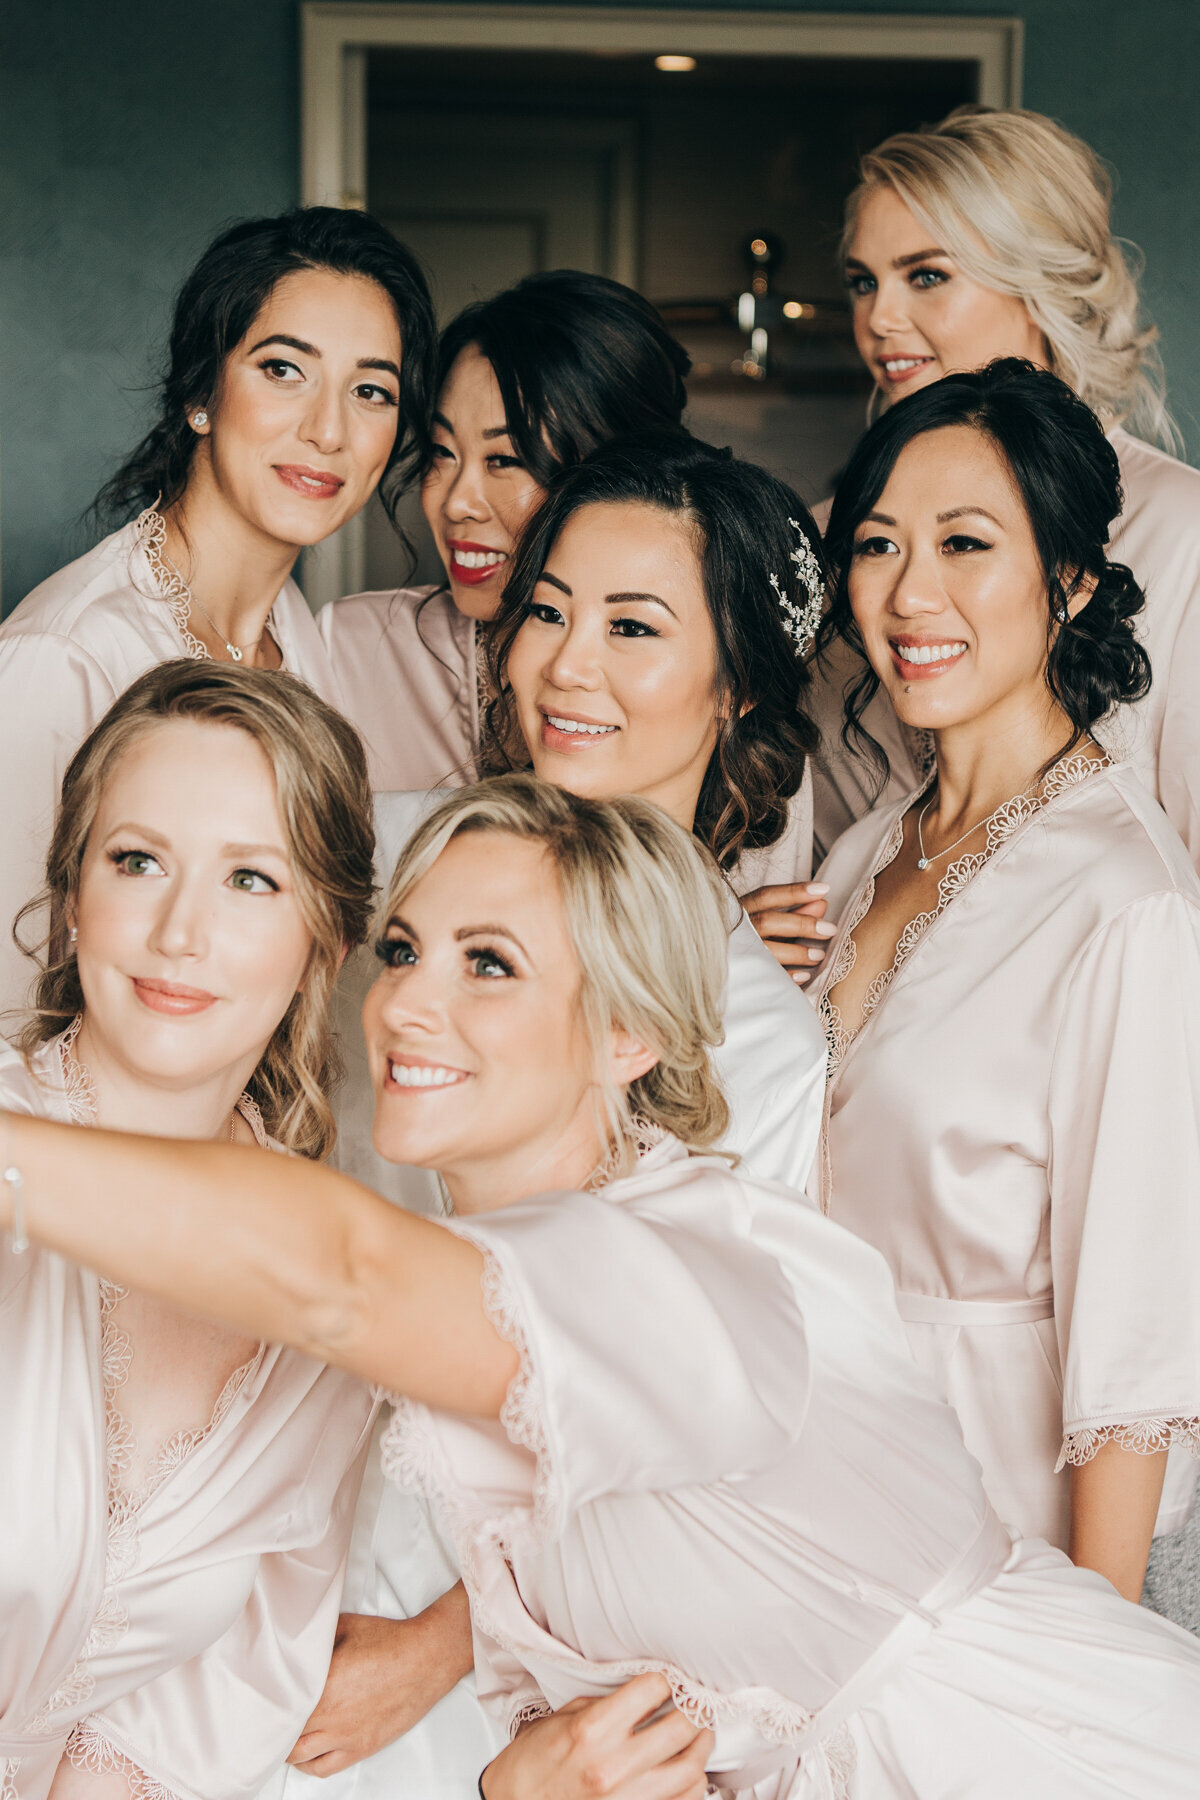 Chic candids of bridal party getting ready photographed by Nova Markina